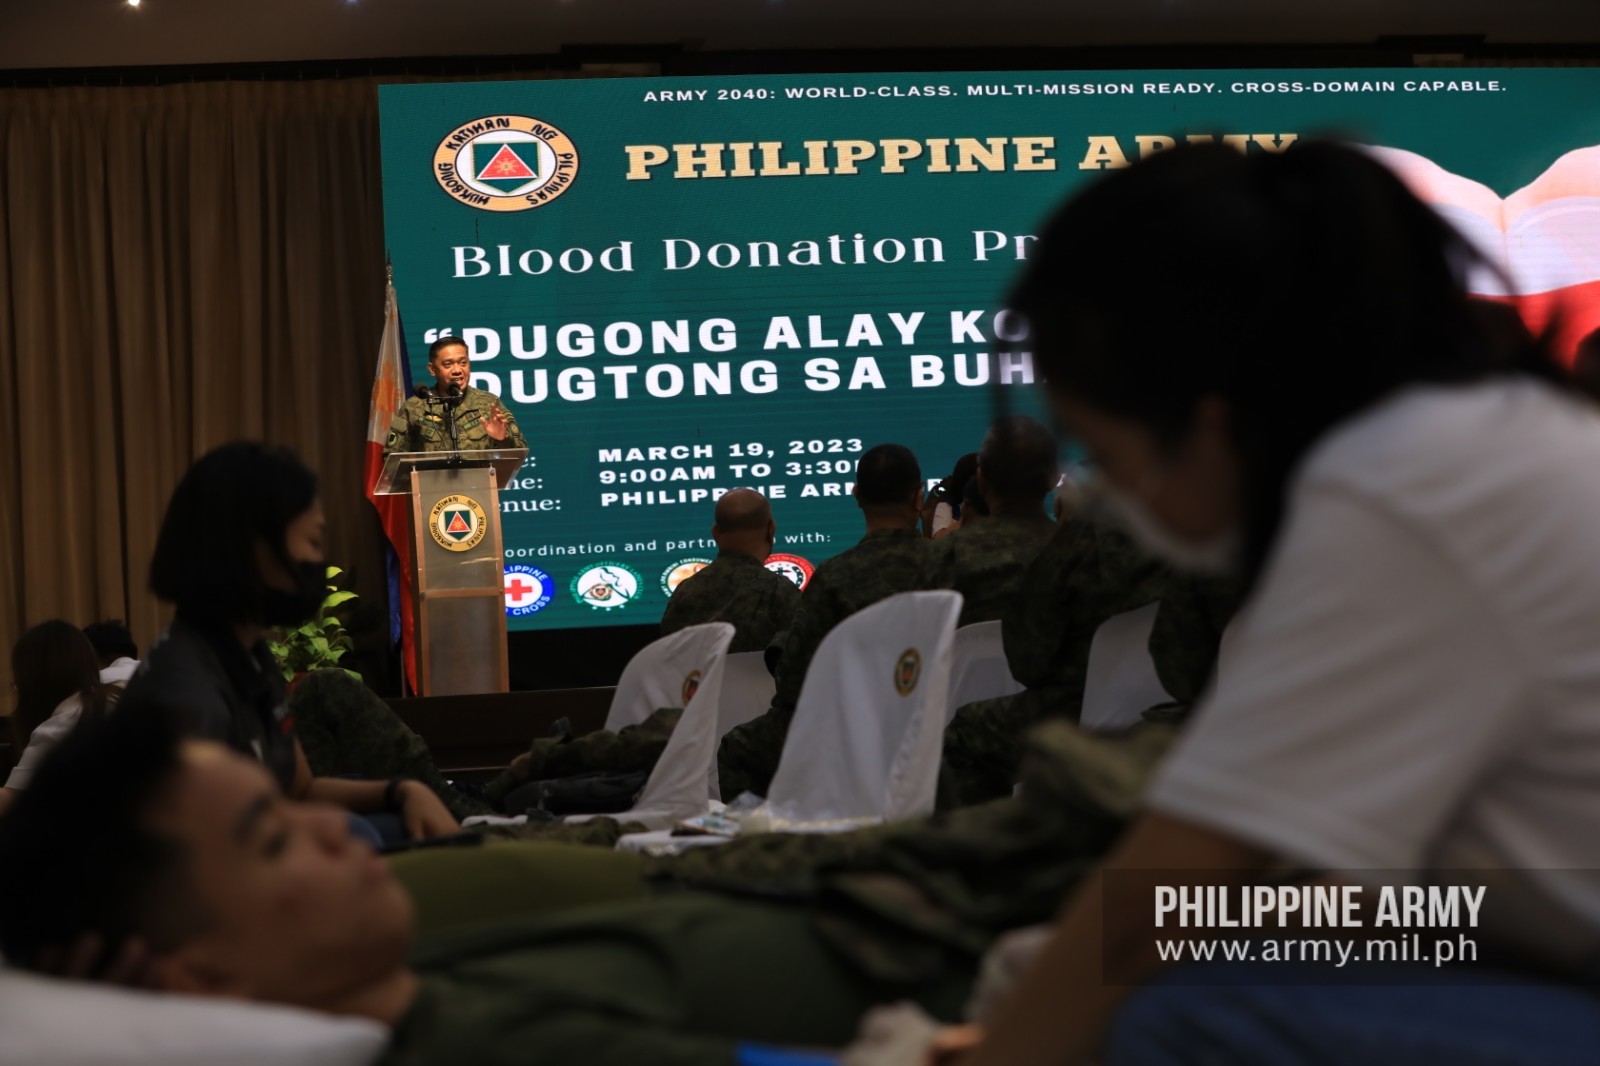 Army holds Anniversary Bloodletting Drive